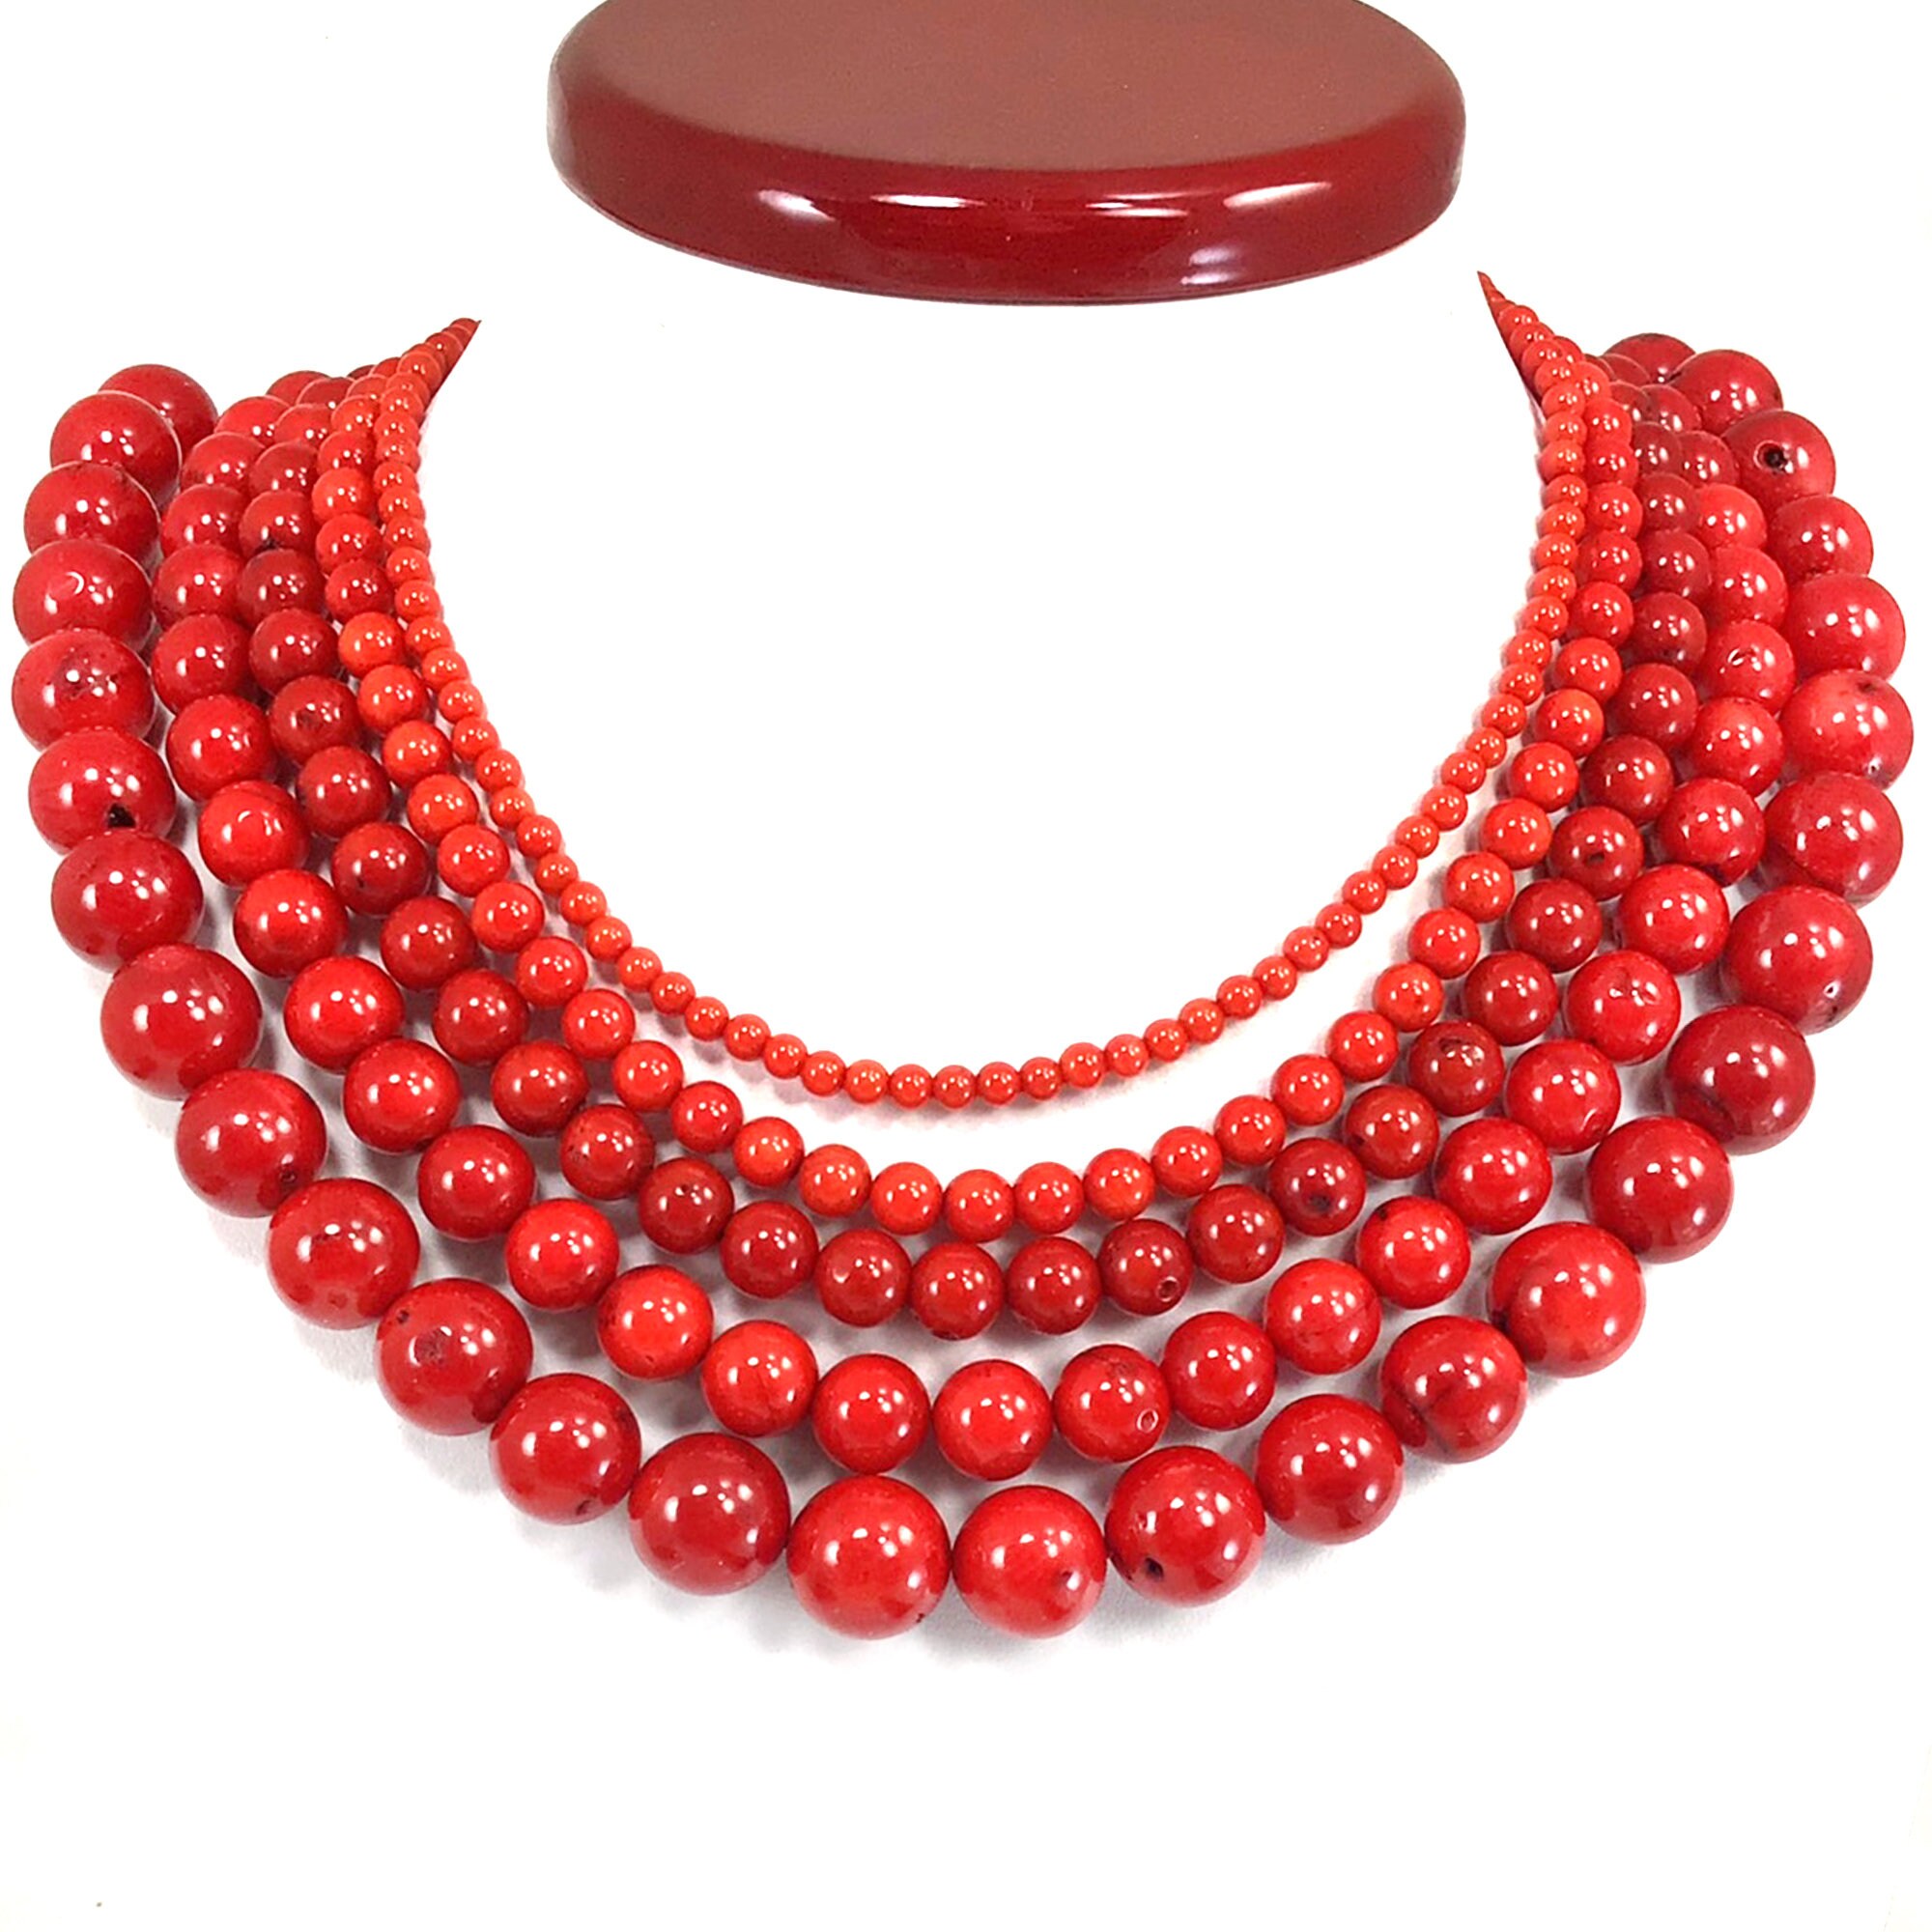 Needles Necklace Red Coral - Red ニードルス 偉大な